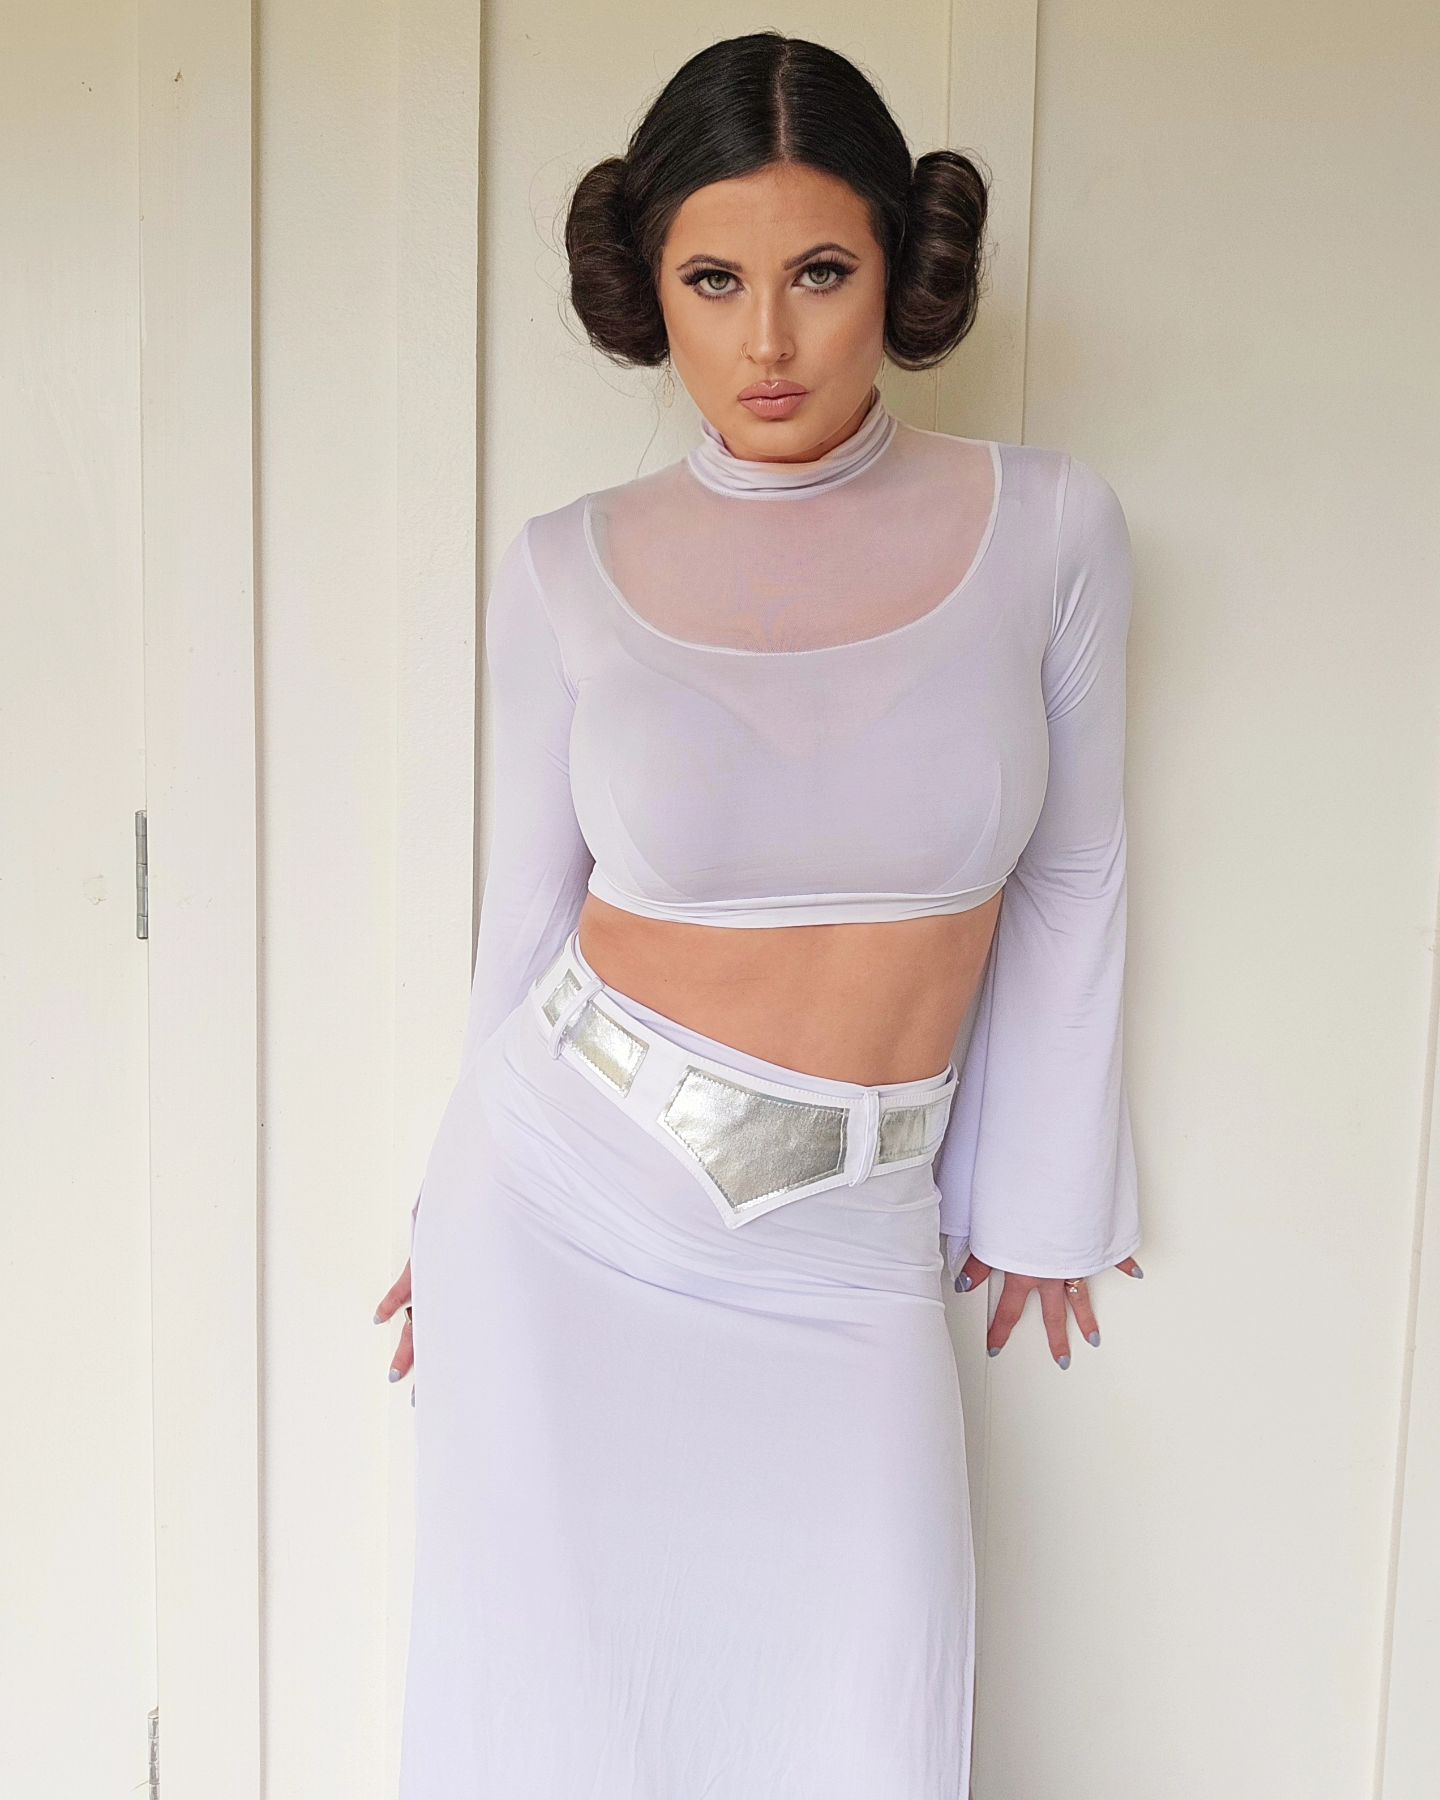 May the 4th be with you! 🌟

#starwars #starwarsday #may #maythe4thbewithyou #maythe4th #nerd #nerdgirl #cosplay #princessleia #explore #explorepage #fyp #followme #ig #igbabeofficial #contentcreator